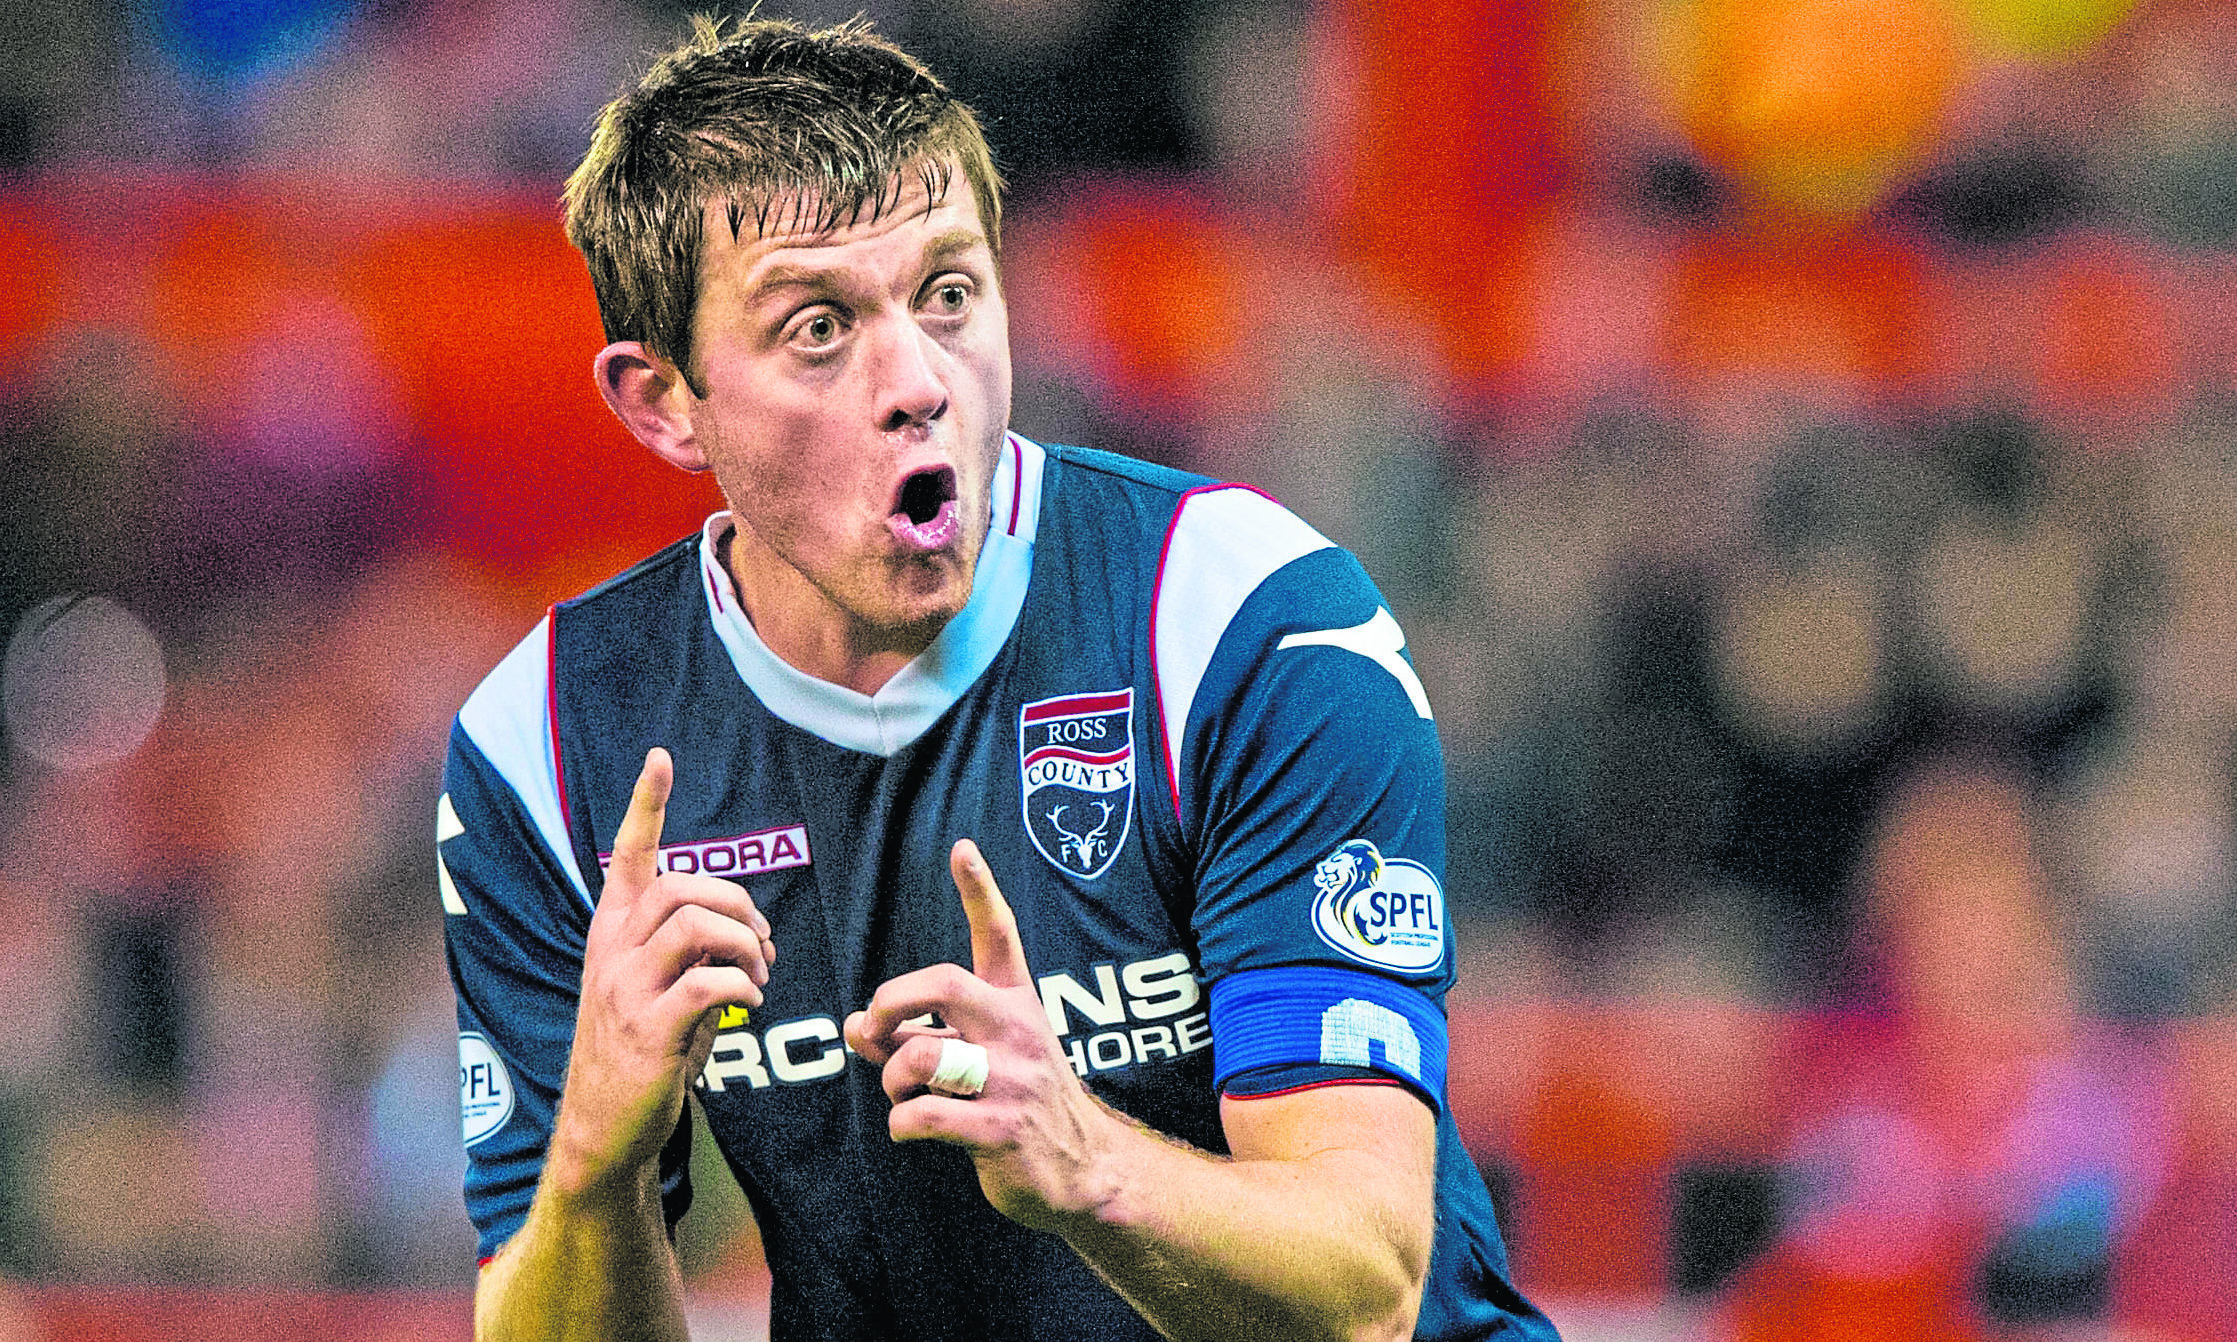 Richie Brittain in action for Ross County at Pittodrie in 2013.